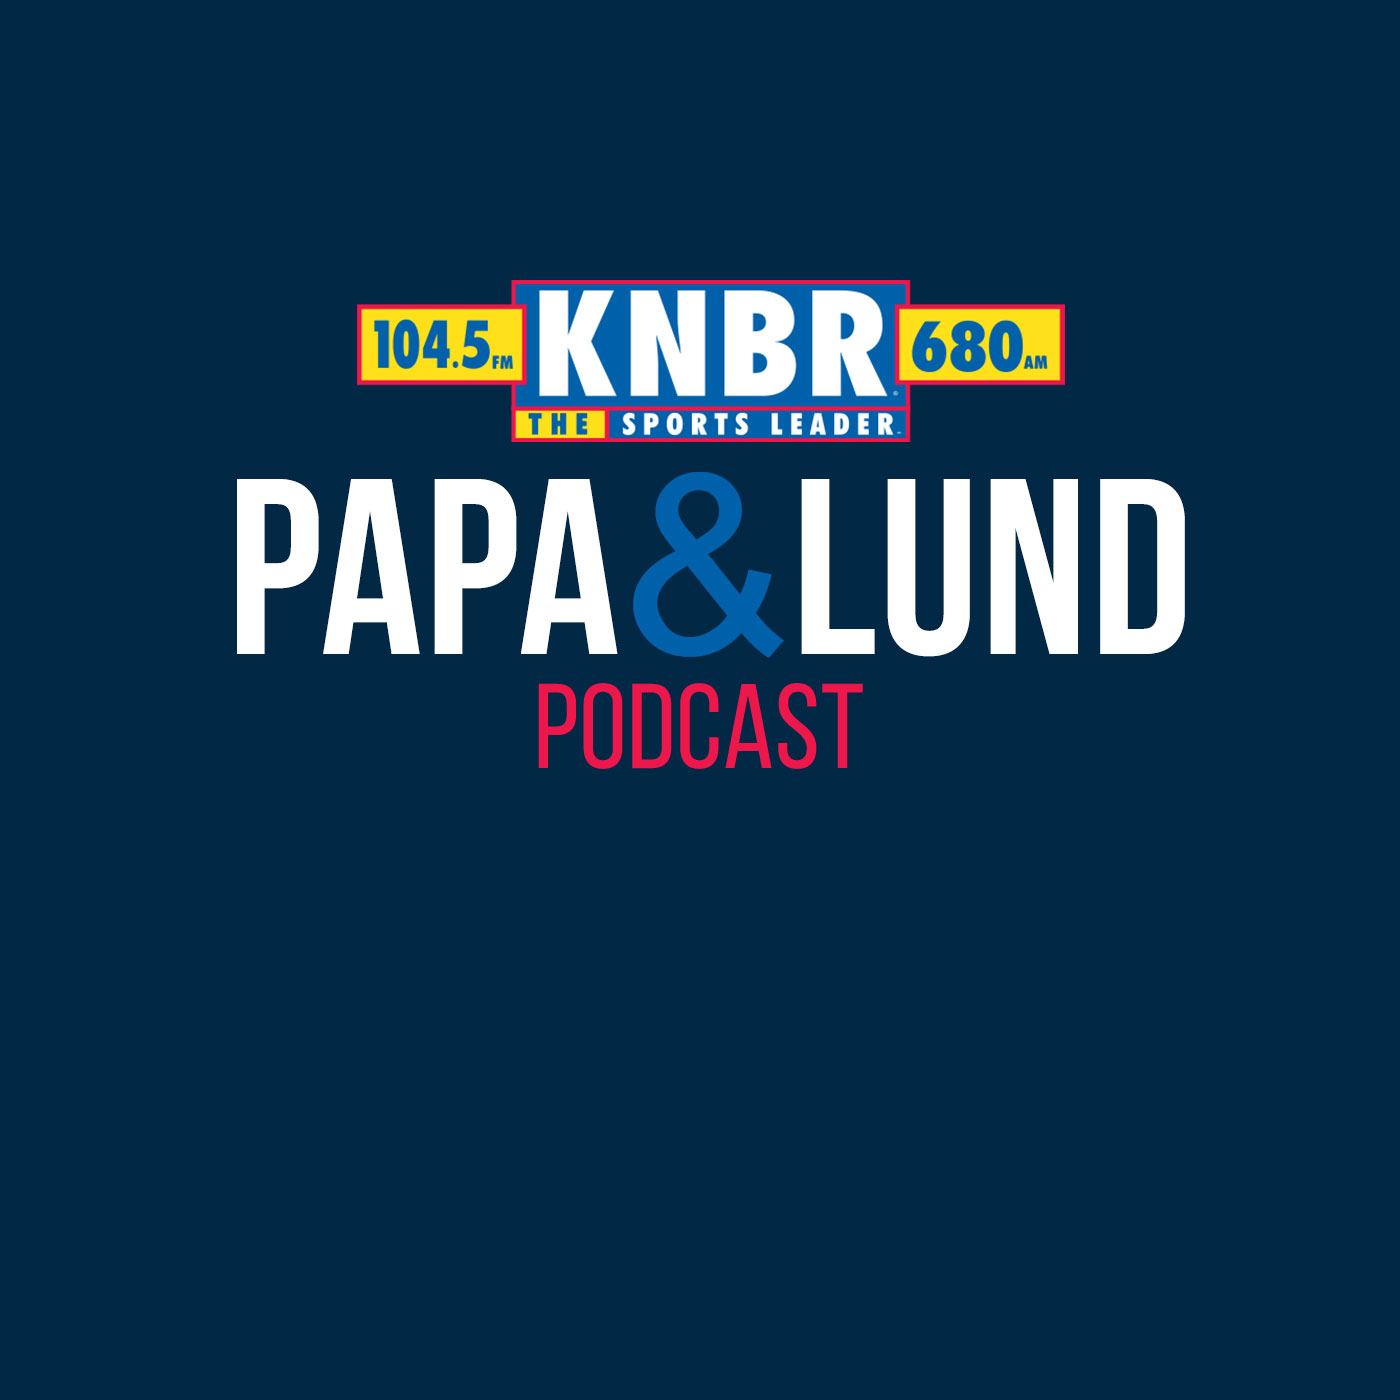 5-17 Raj Mathai joins Papa & Lund to discuss Steve Kerr's comments about his future with the Warriors